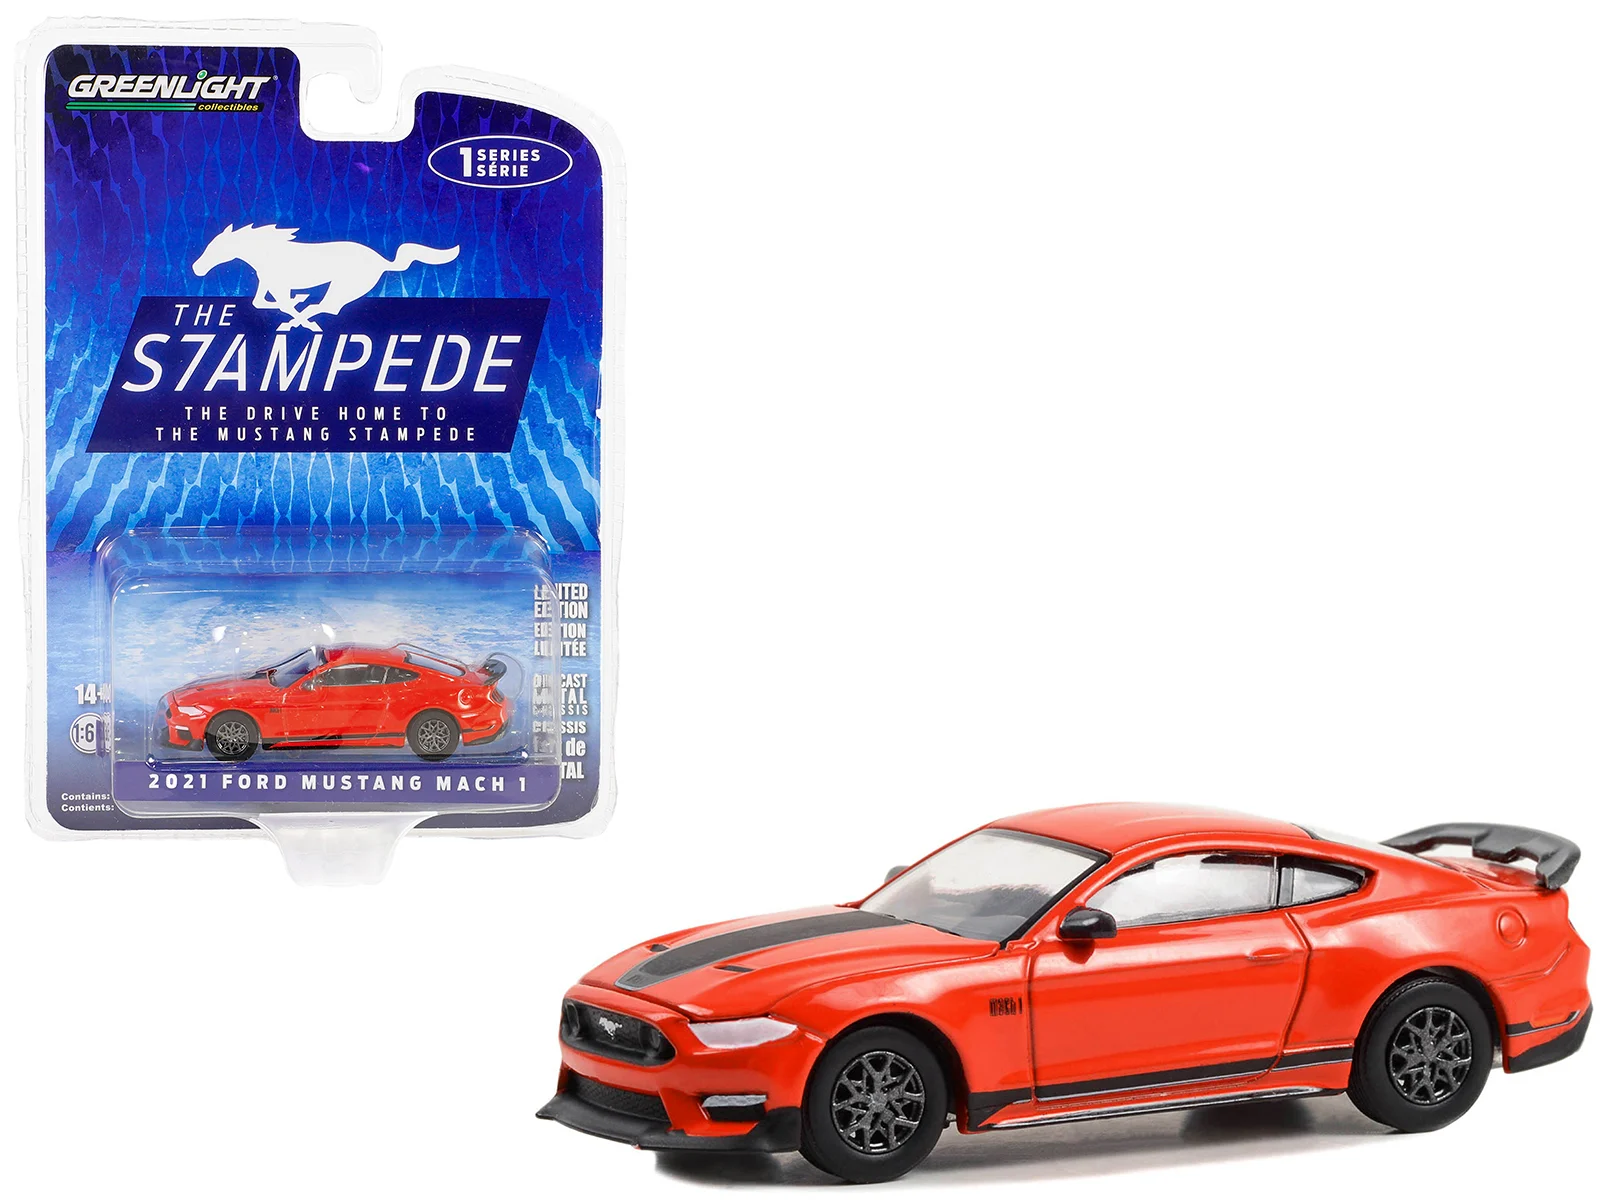 Greenlight 1/64 The Drive Home to the Mustang Stampede Series 1 - 2021 Ford Mustang Mach 1 - Race Red Solid Pack 13340-E - Thumbnail